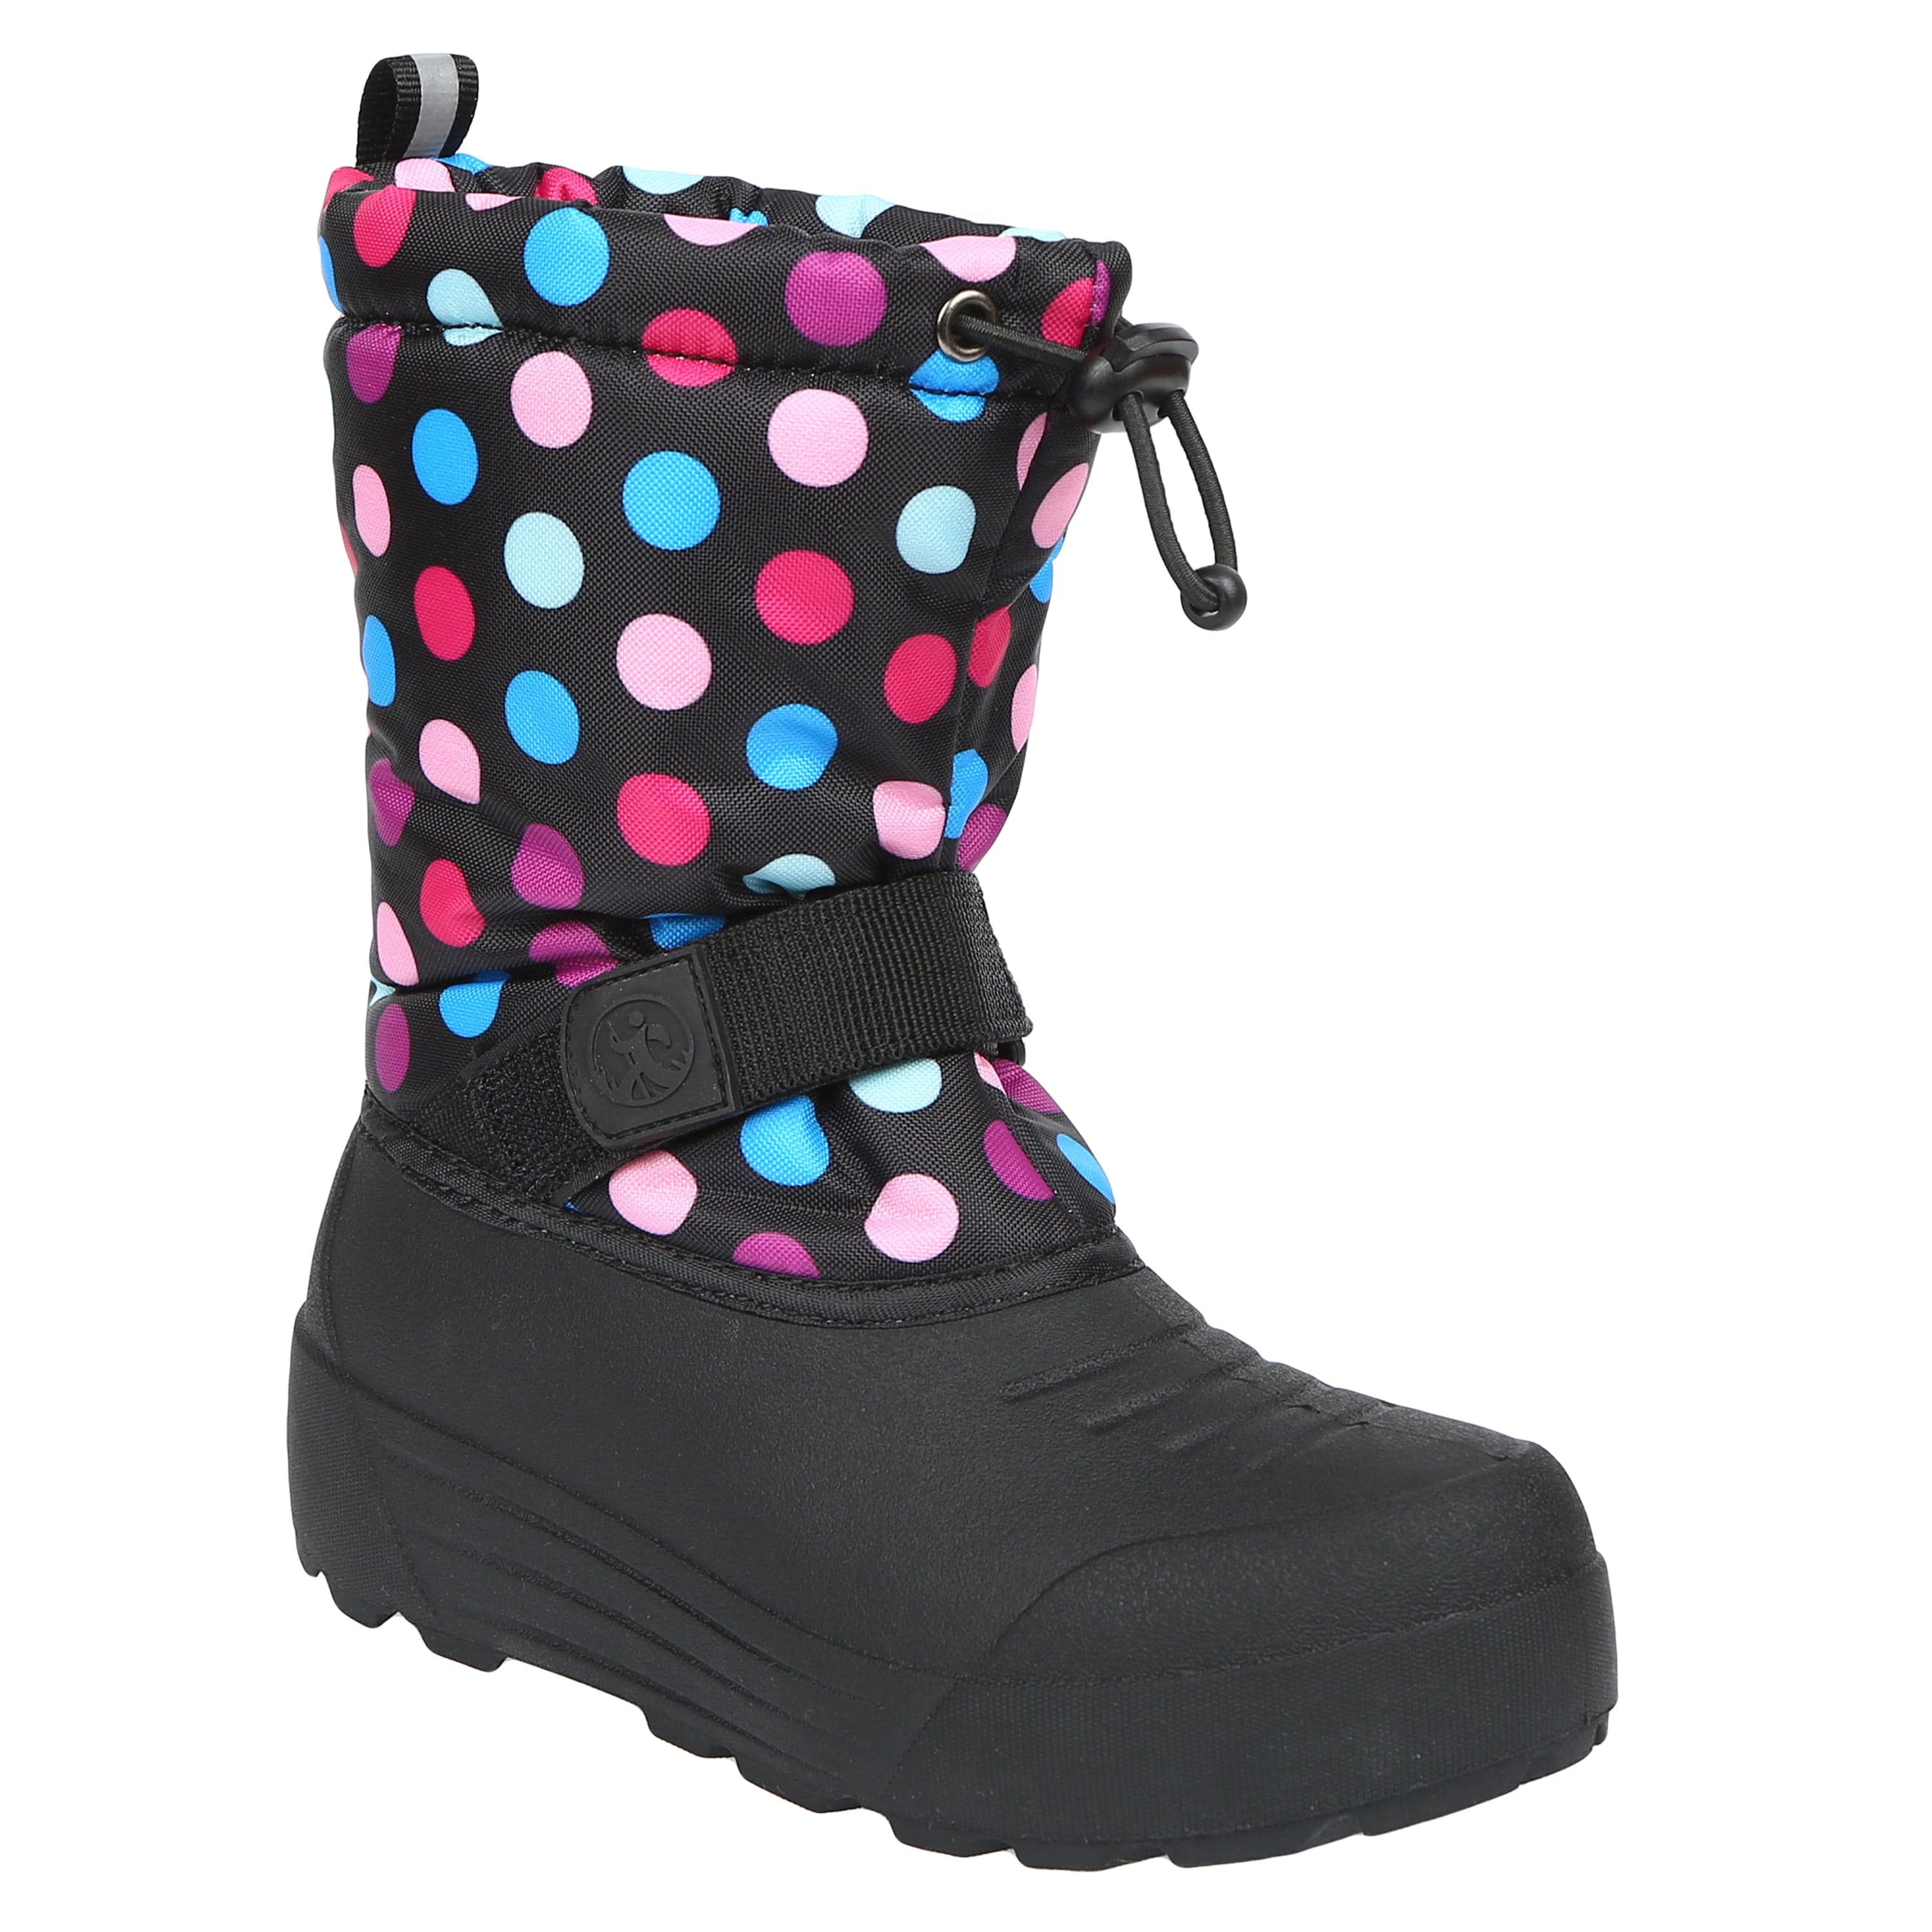 Kid's Frosty Insulated Winter Snow Boot - Northside USA